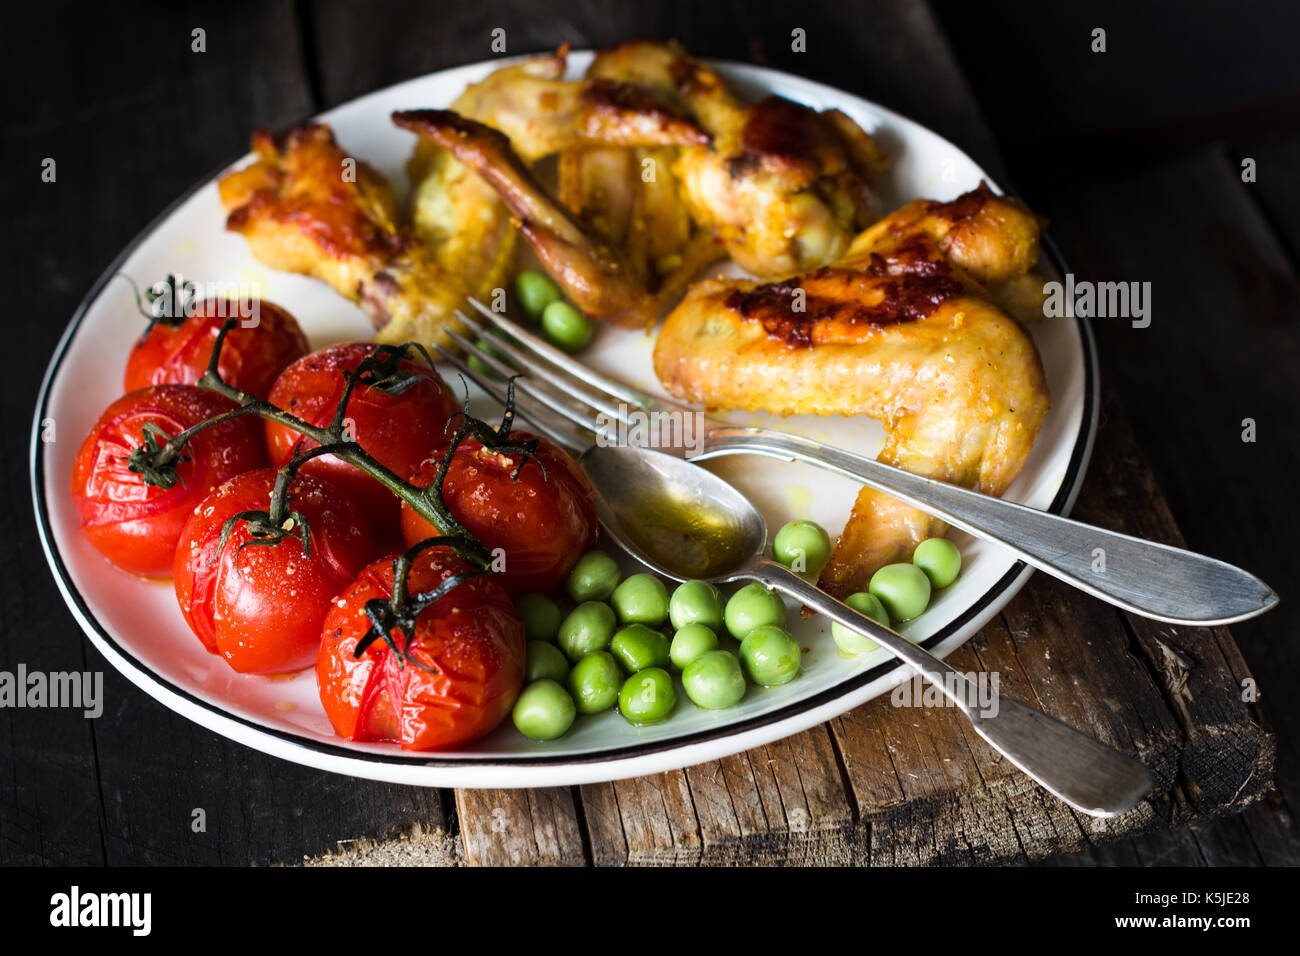 Spicy chicken wings, roasted cherry tomatoes and sauteed green peas on white plate. Baslanced meal. Closeup view, selective focus Stock Photo